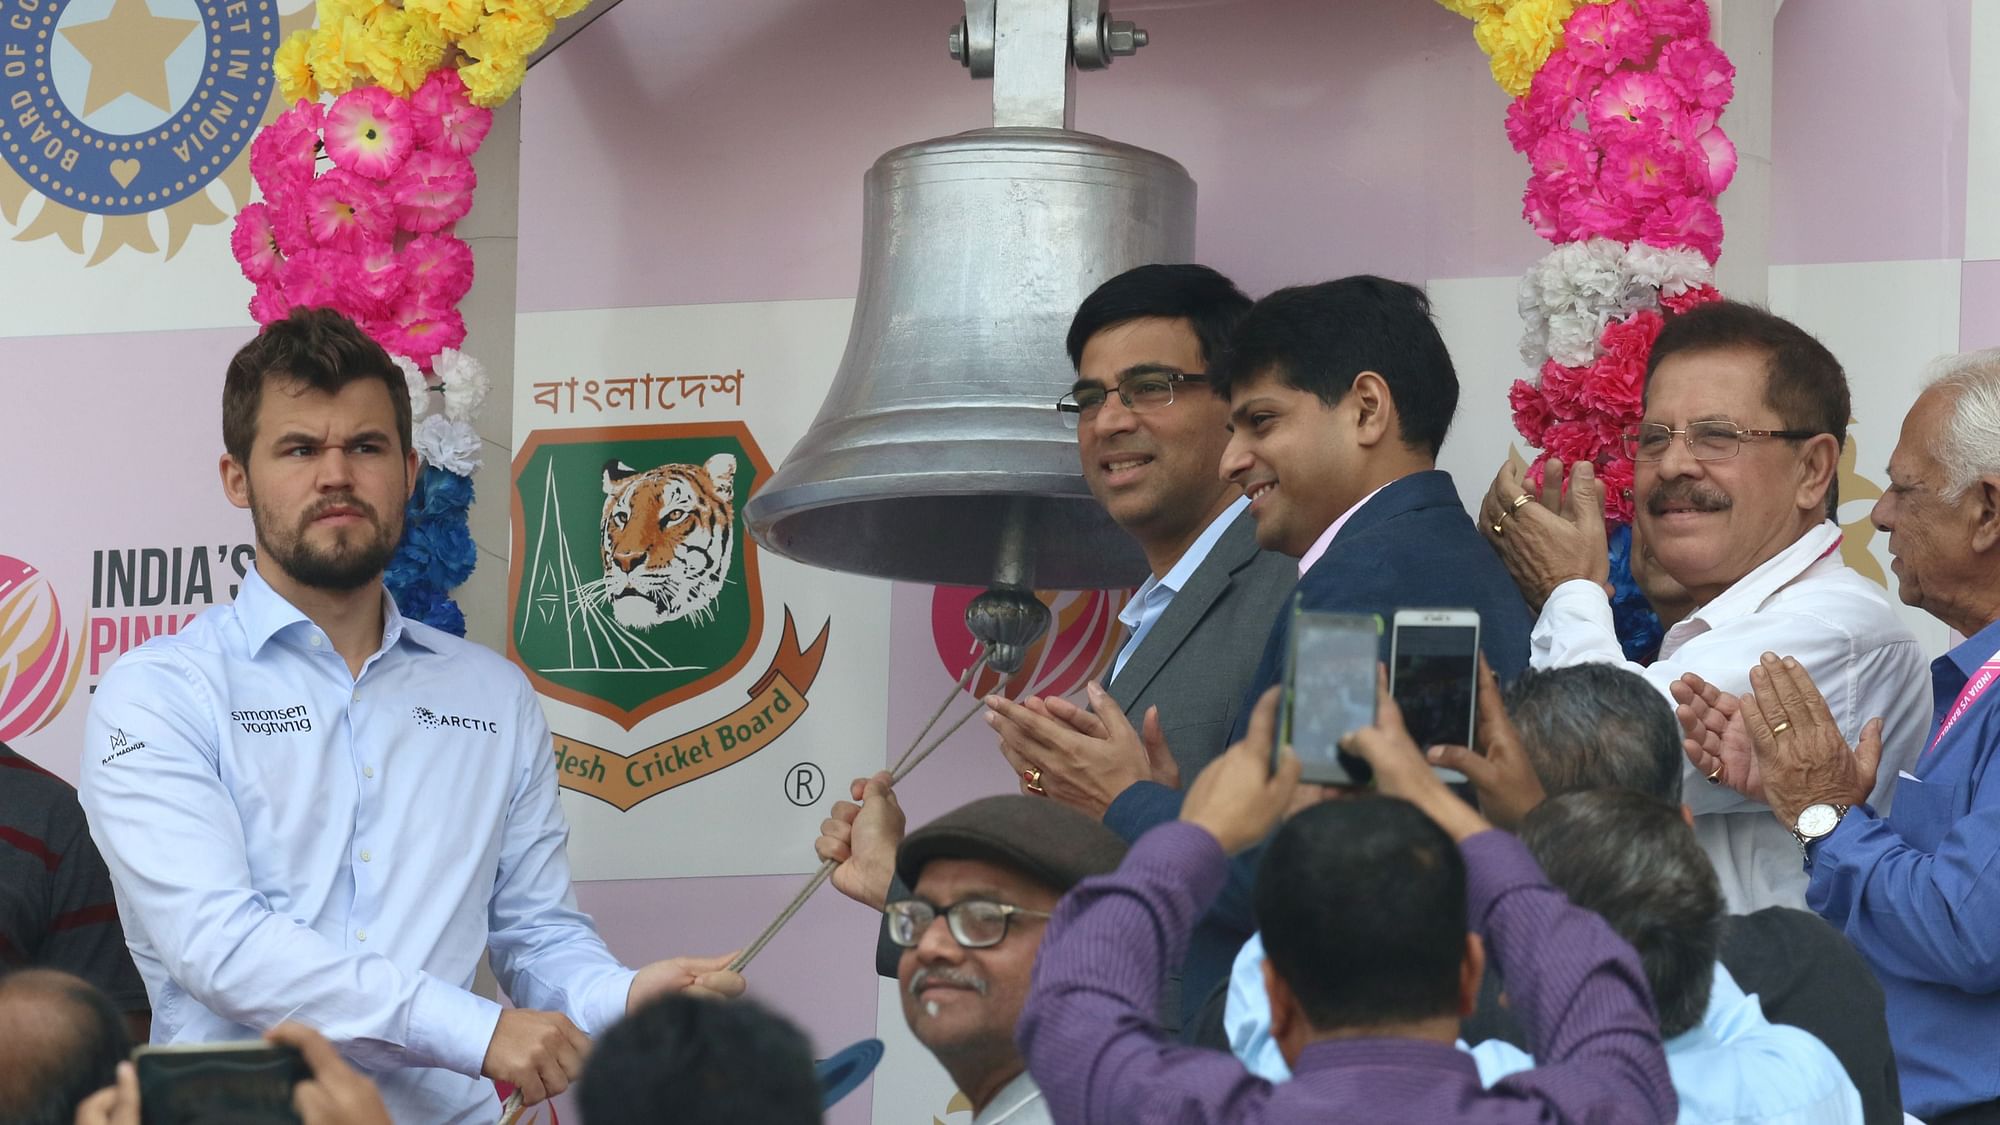 Indian chess Grandmaster Viswanathan Anand&nbsp; &amp; World Champions Magnus Carlsen ringing the bell ahead of Day 2 of the Pink Ball Test match between India and Bangladesh at the Eden Gardens.